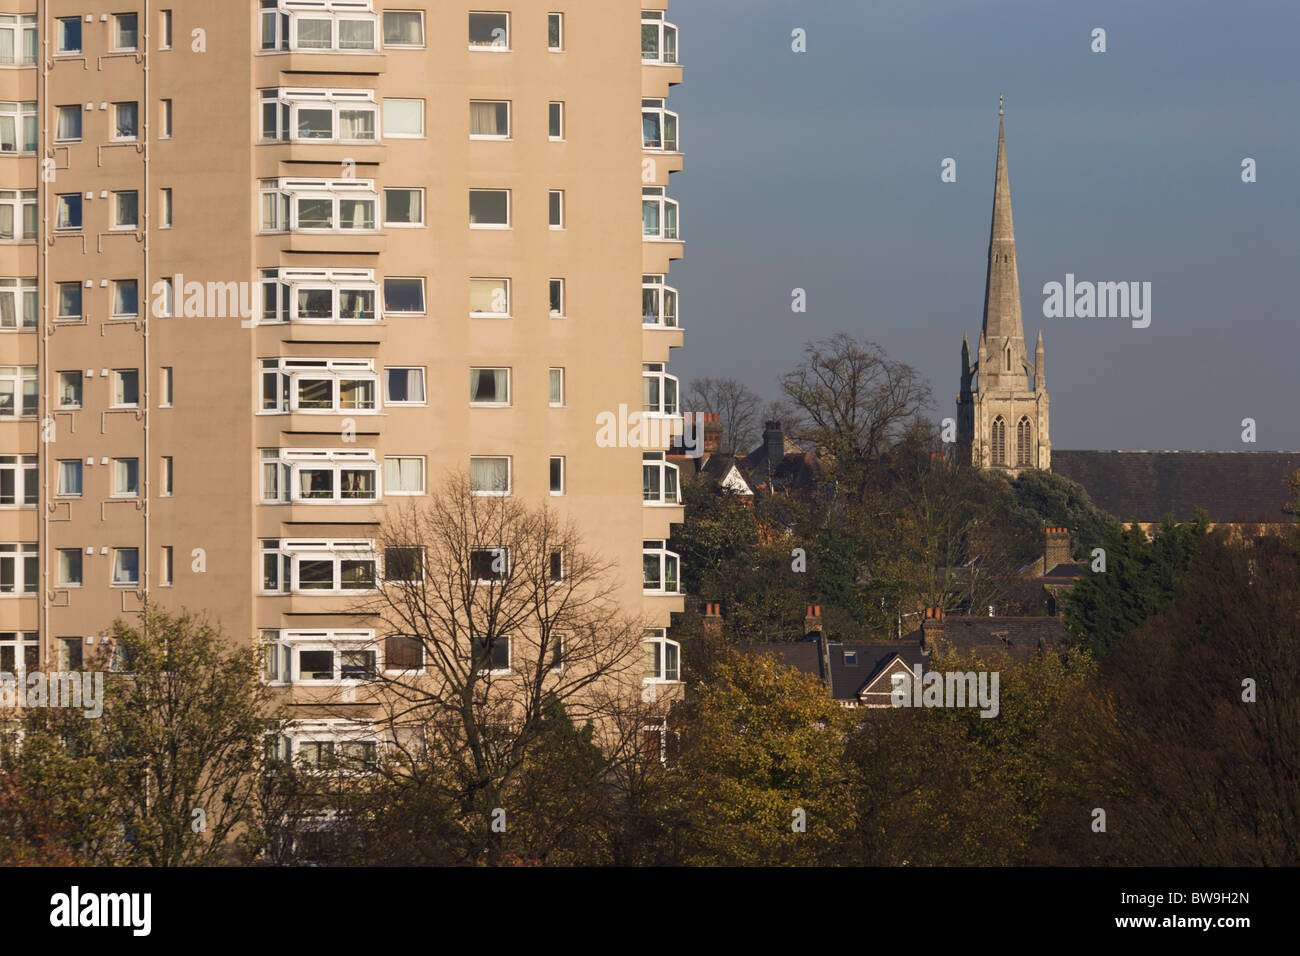 High-rise flats and spire of St. Paul's Church seen from Brockwell Park, Herne Hill, South London. Stock Photo